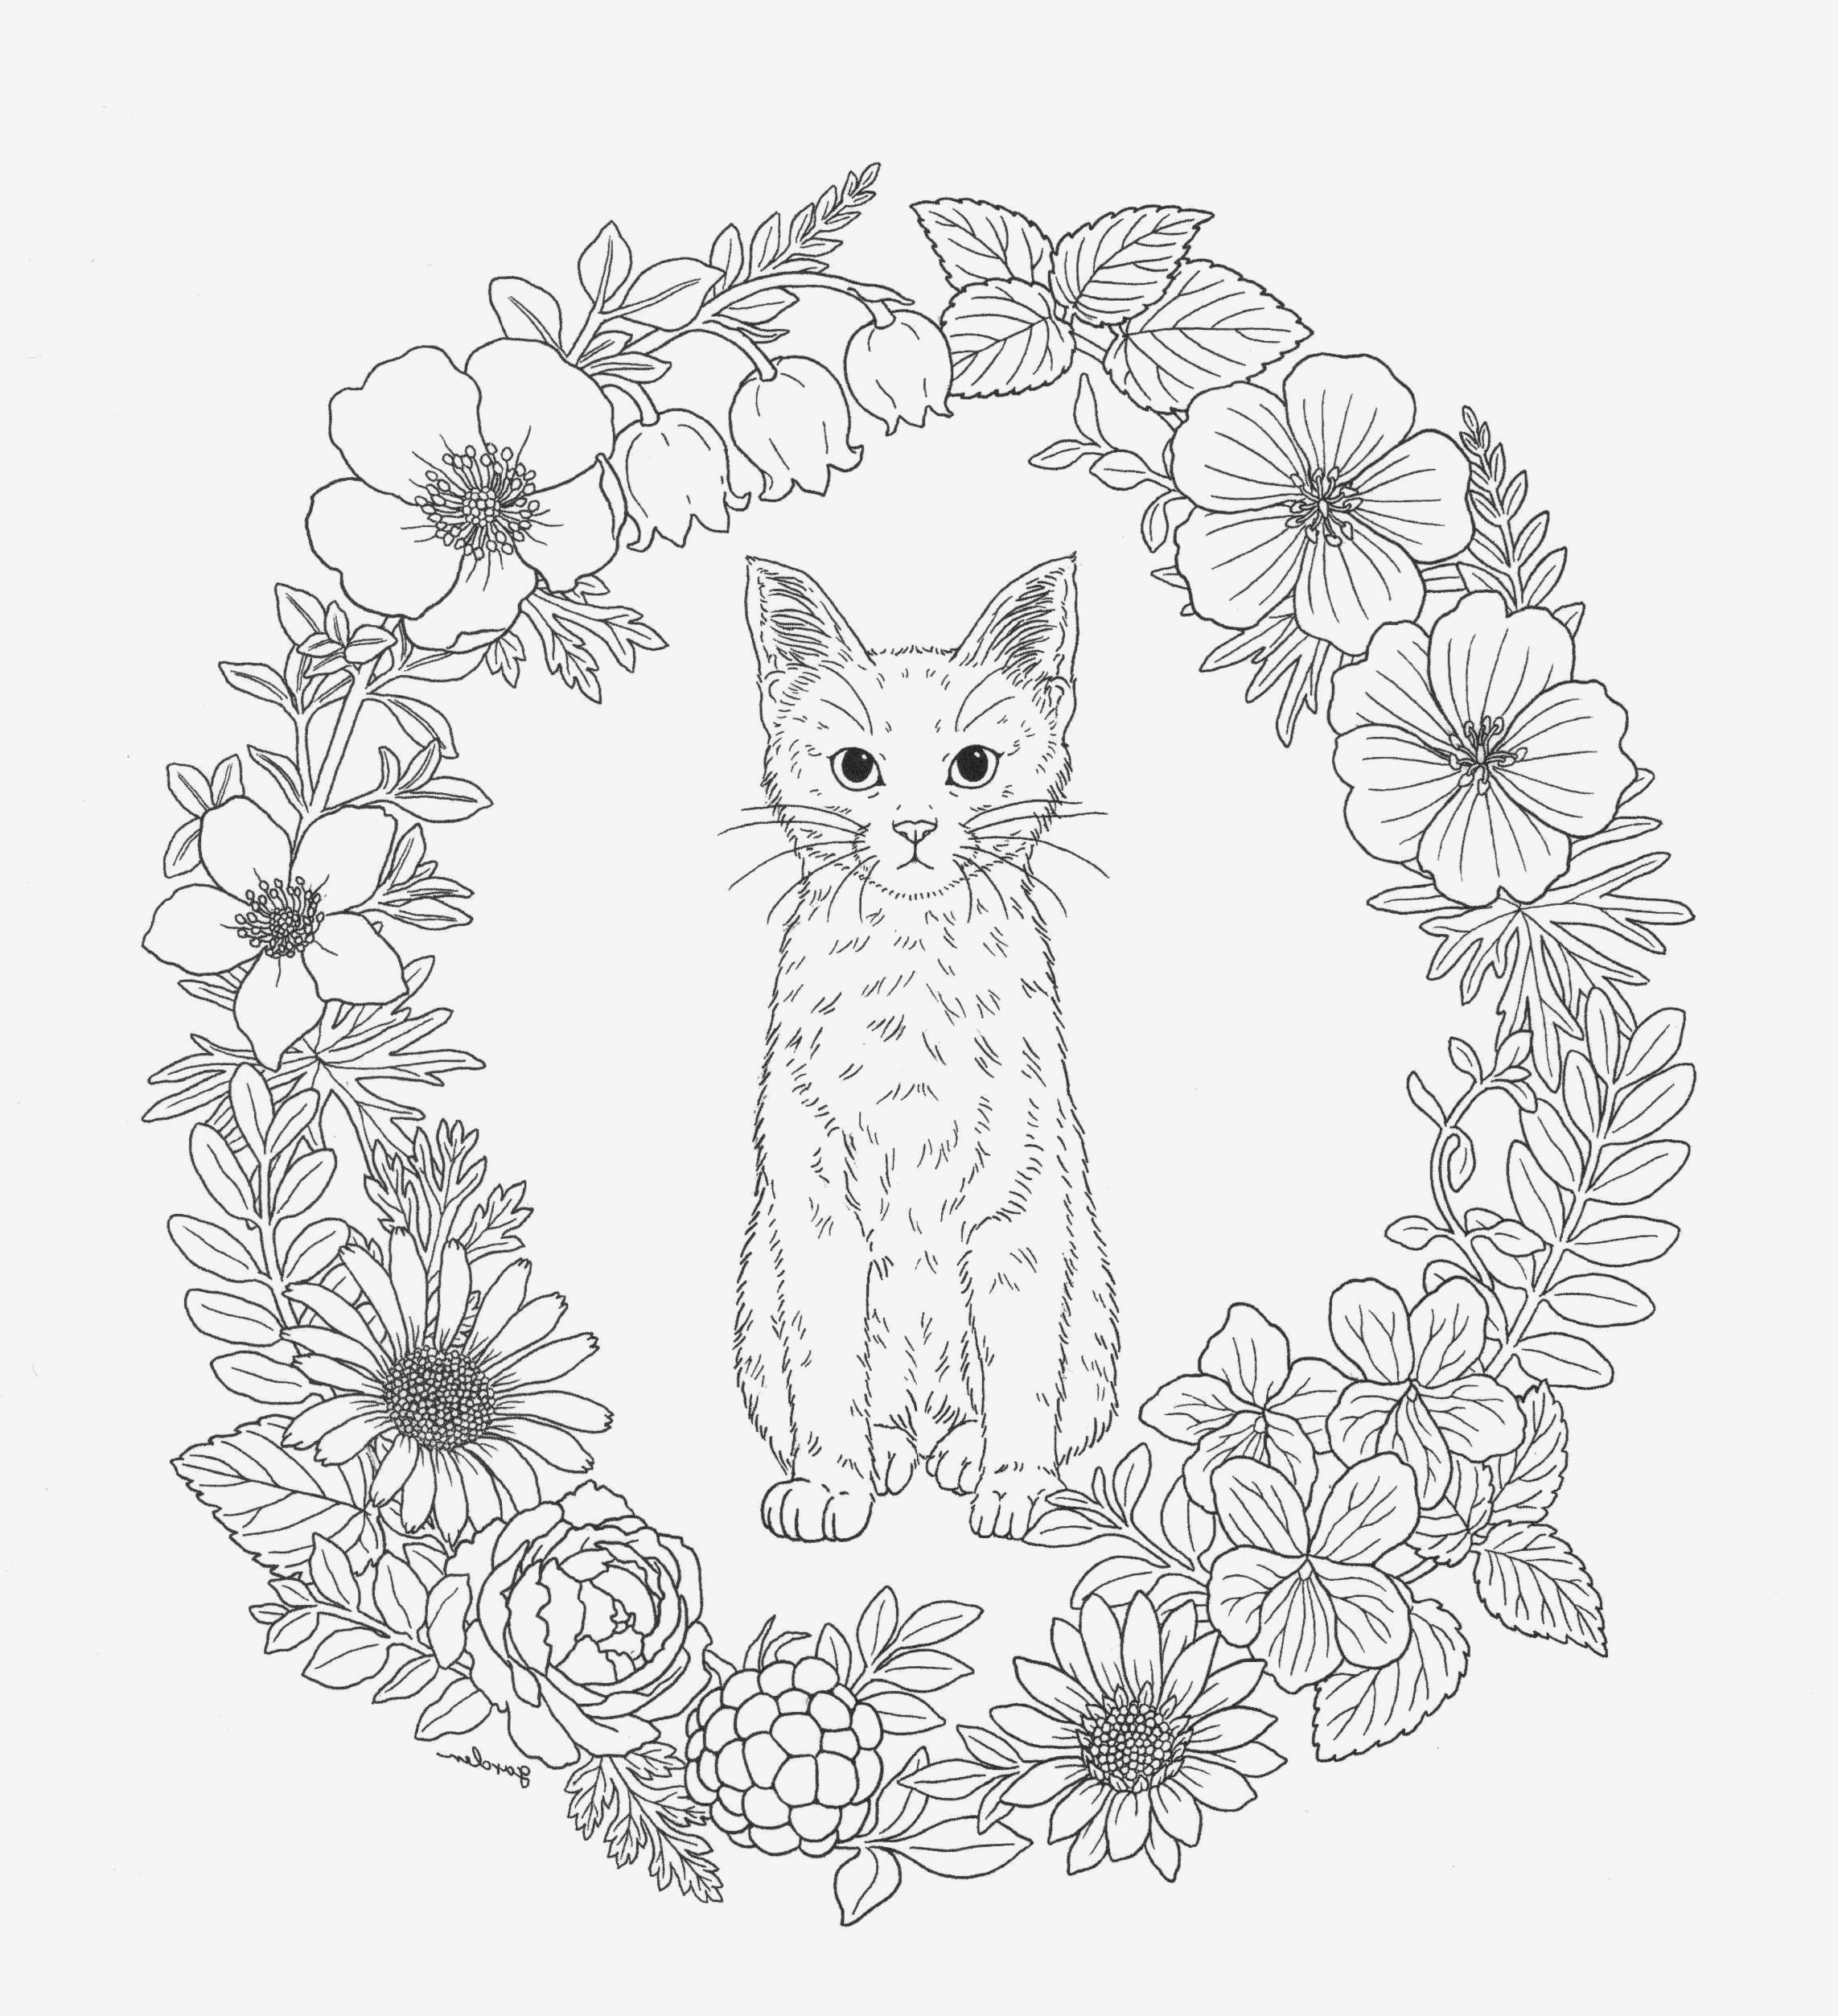 forest coloring sheet inspirational images coloring pages page 12 coloring of forest coloring sheet